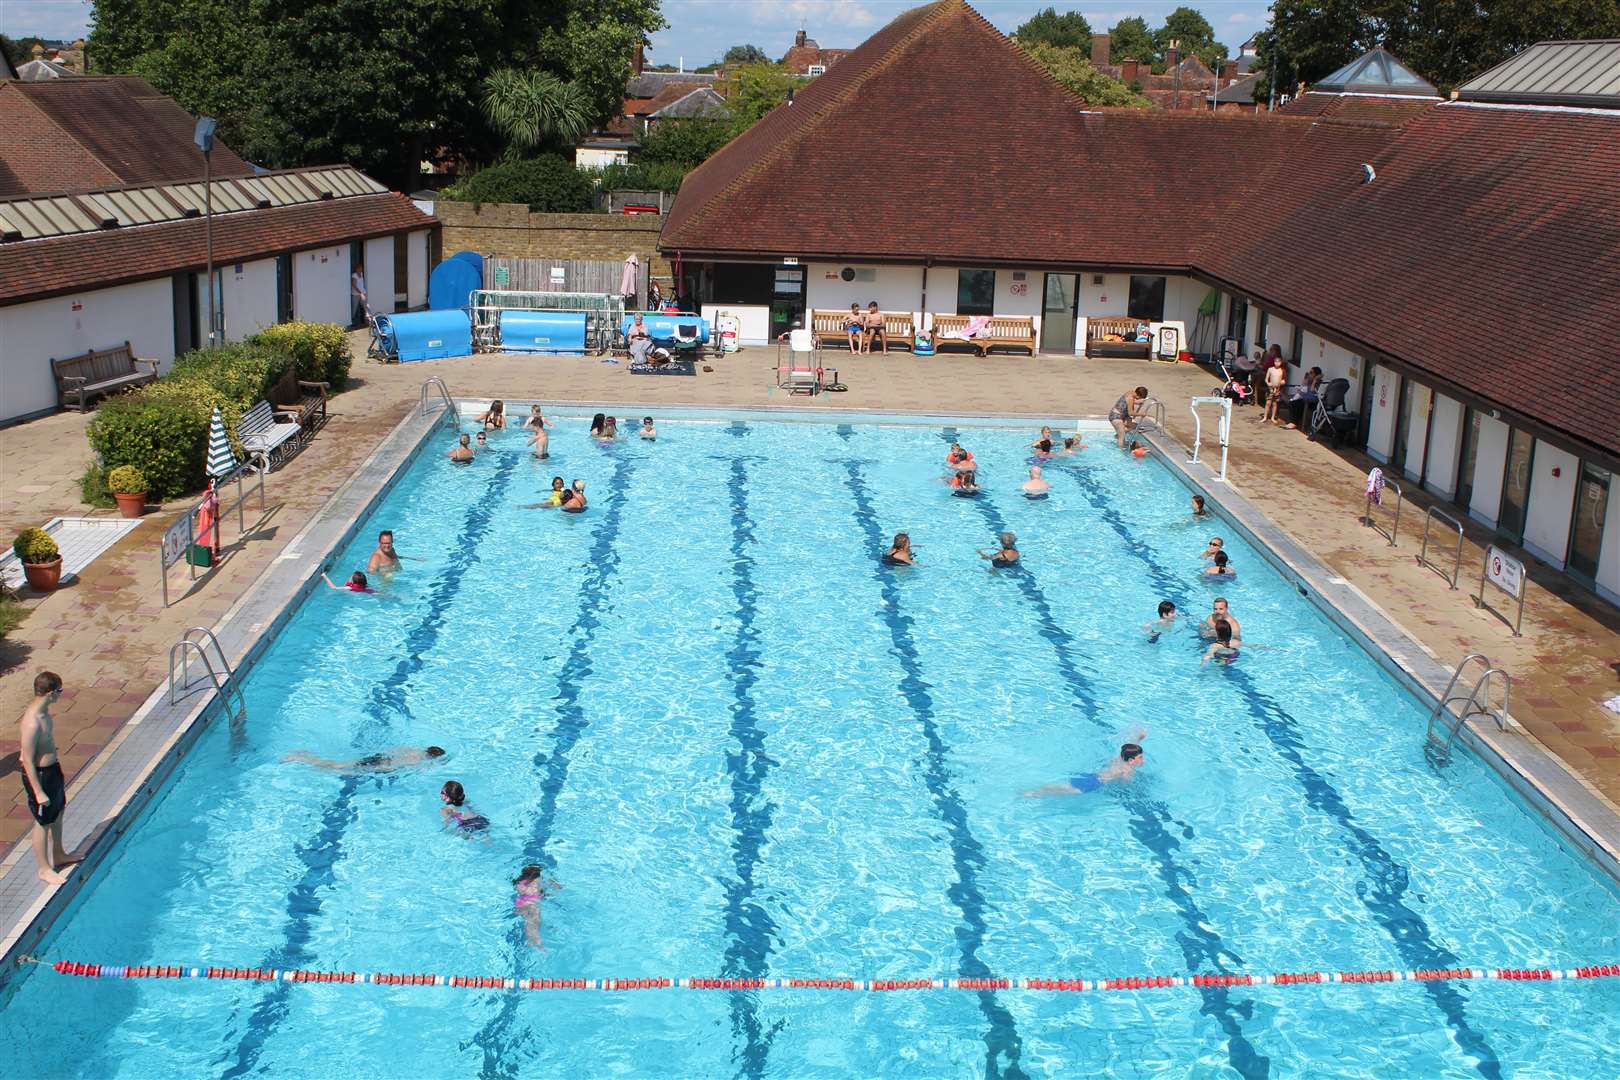 View of outdoor pools from top diving board Picture: Poppy Boorman/Faversham Pools